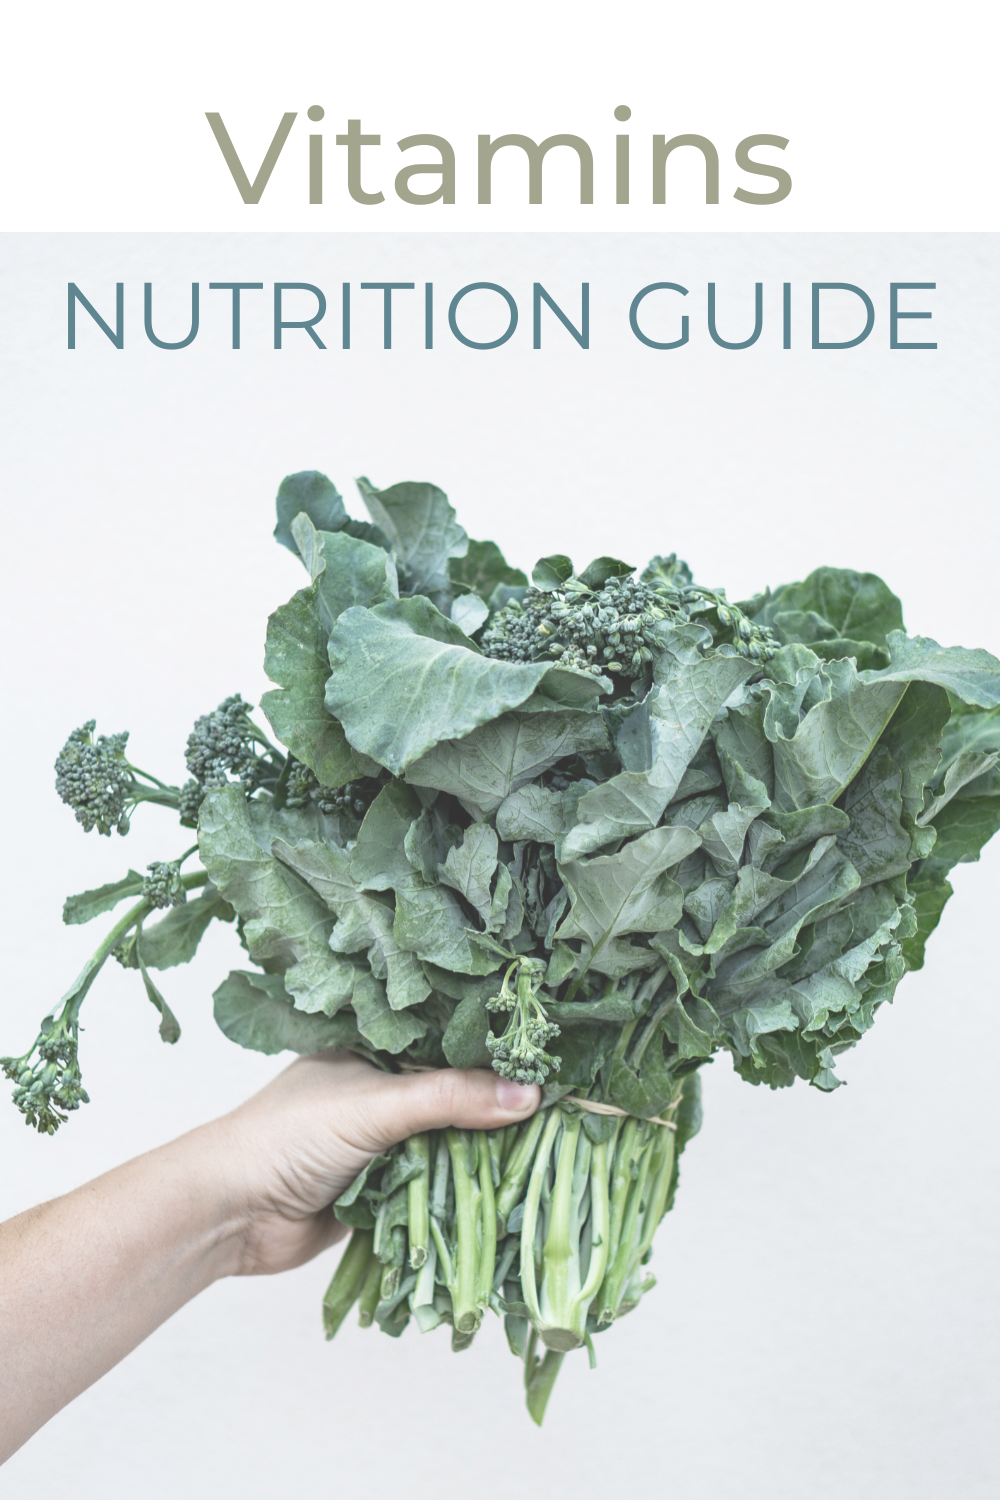 Get the Vitamins Nutrition Guide!